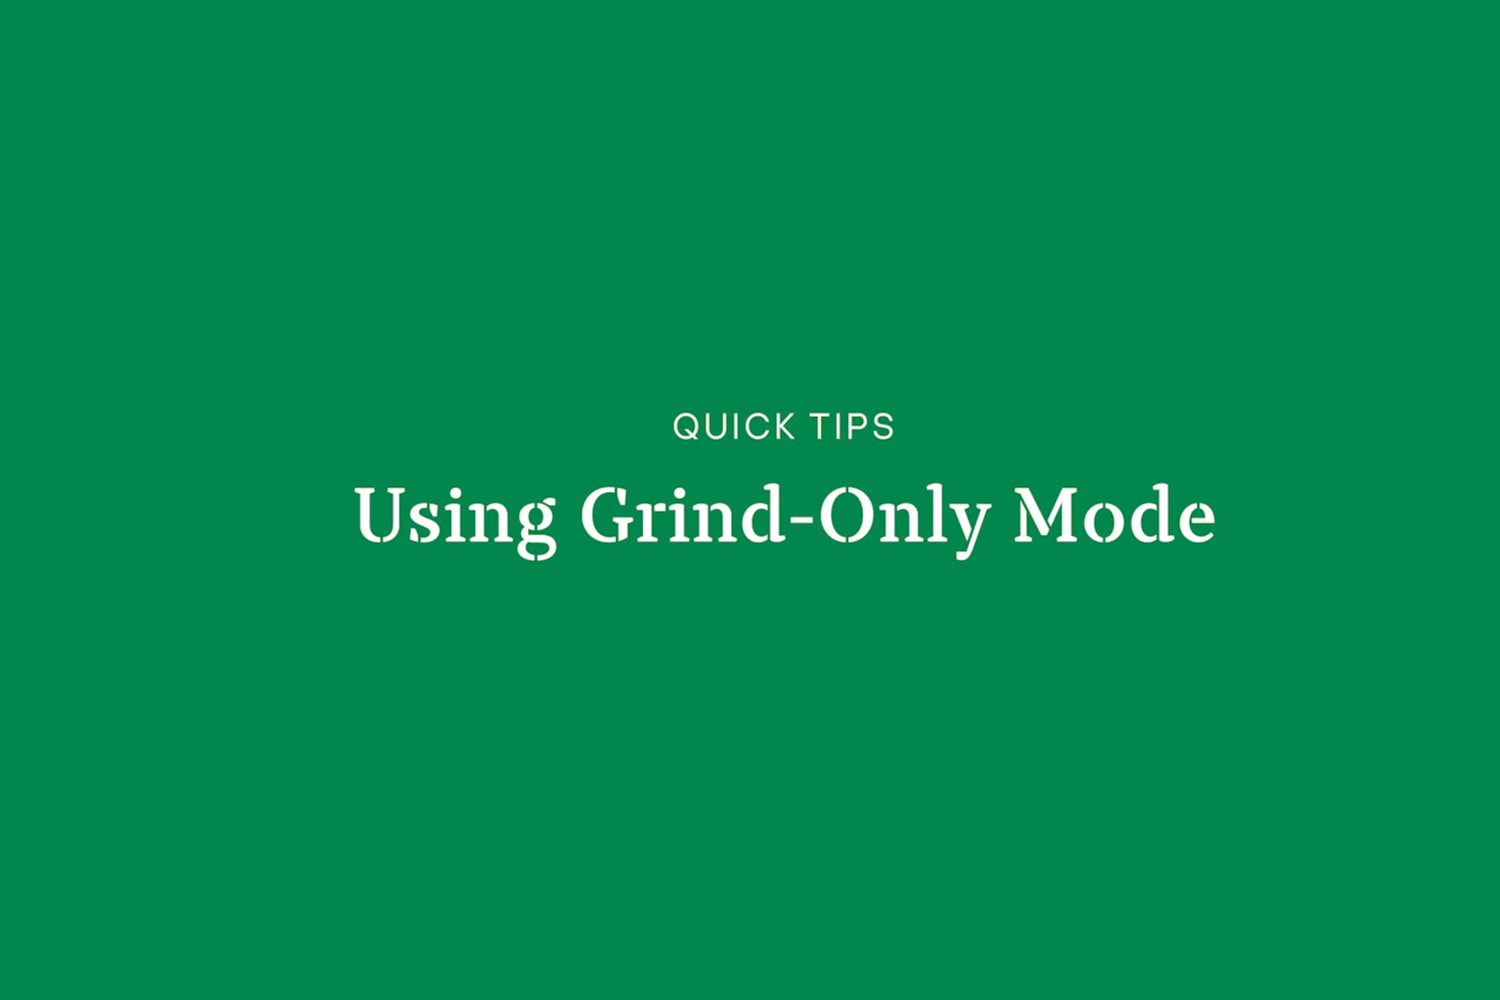 A bright green video poster with a white-lettered title: “Quick Tips: Using Grind-Only Mode.”